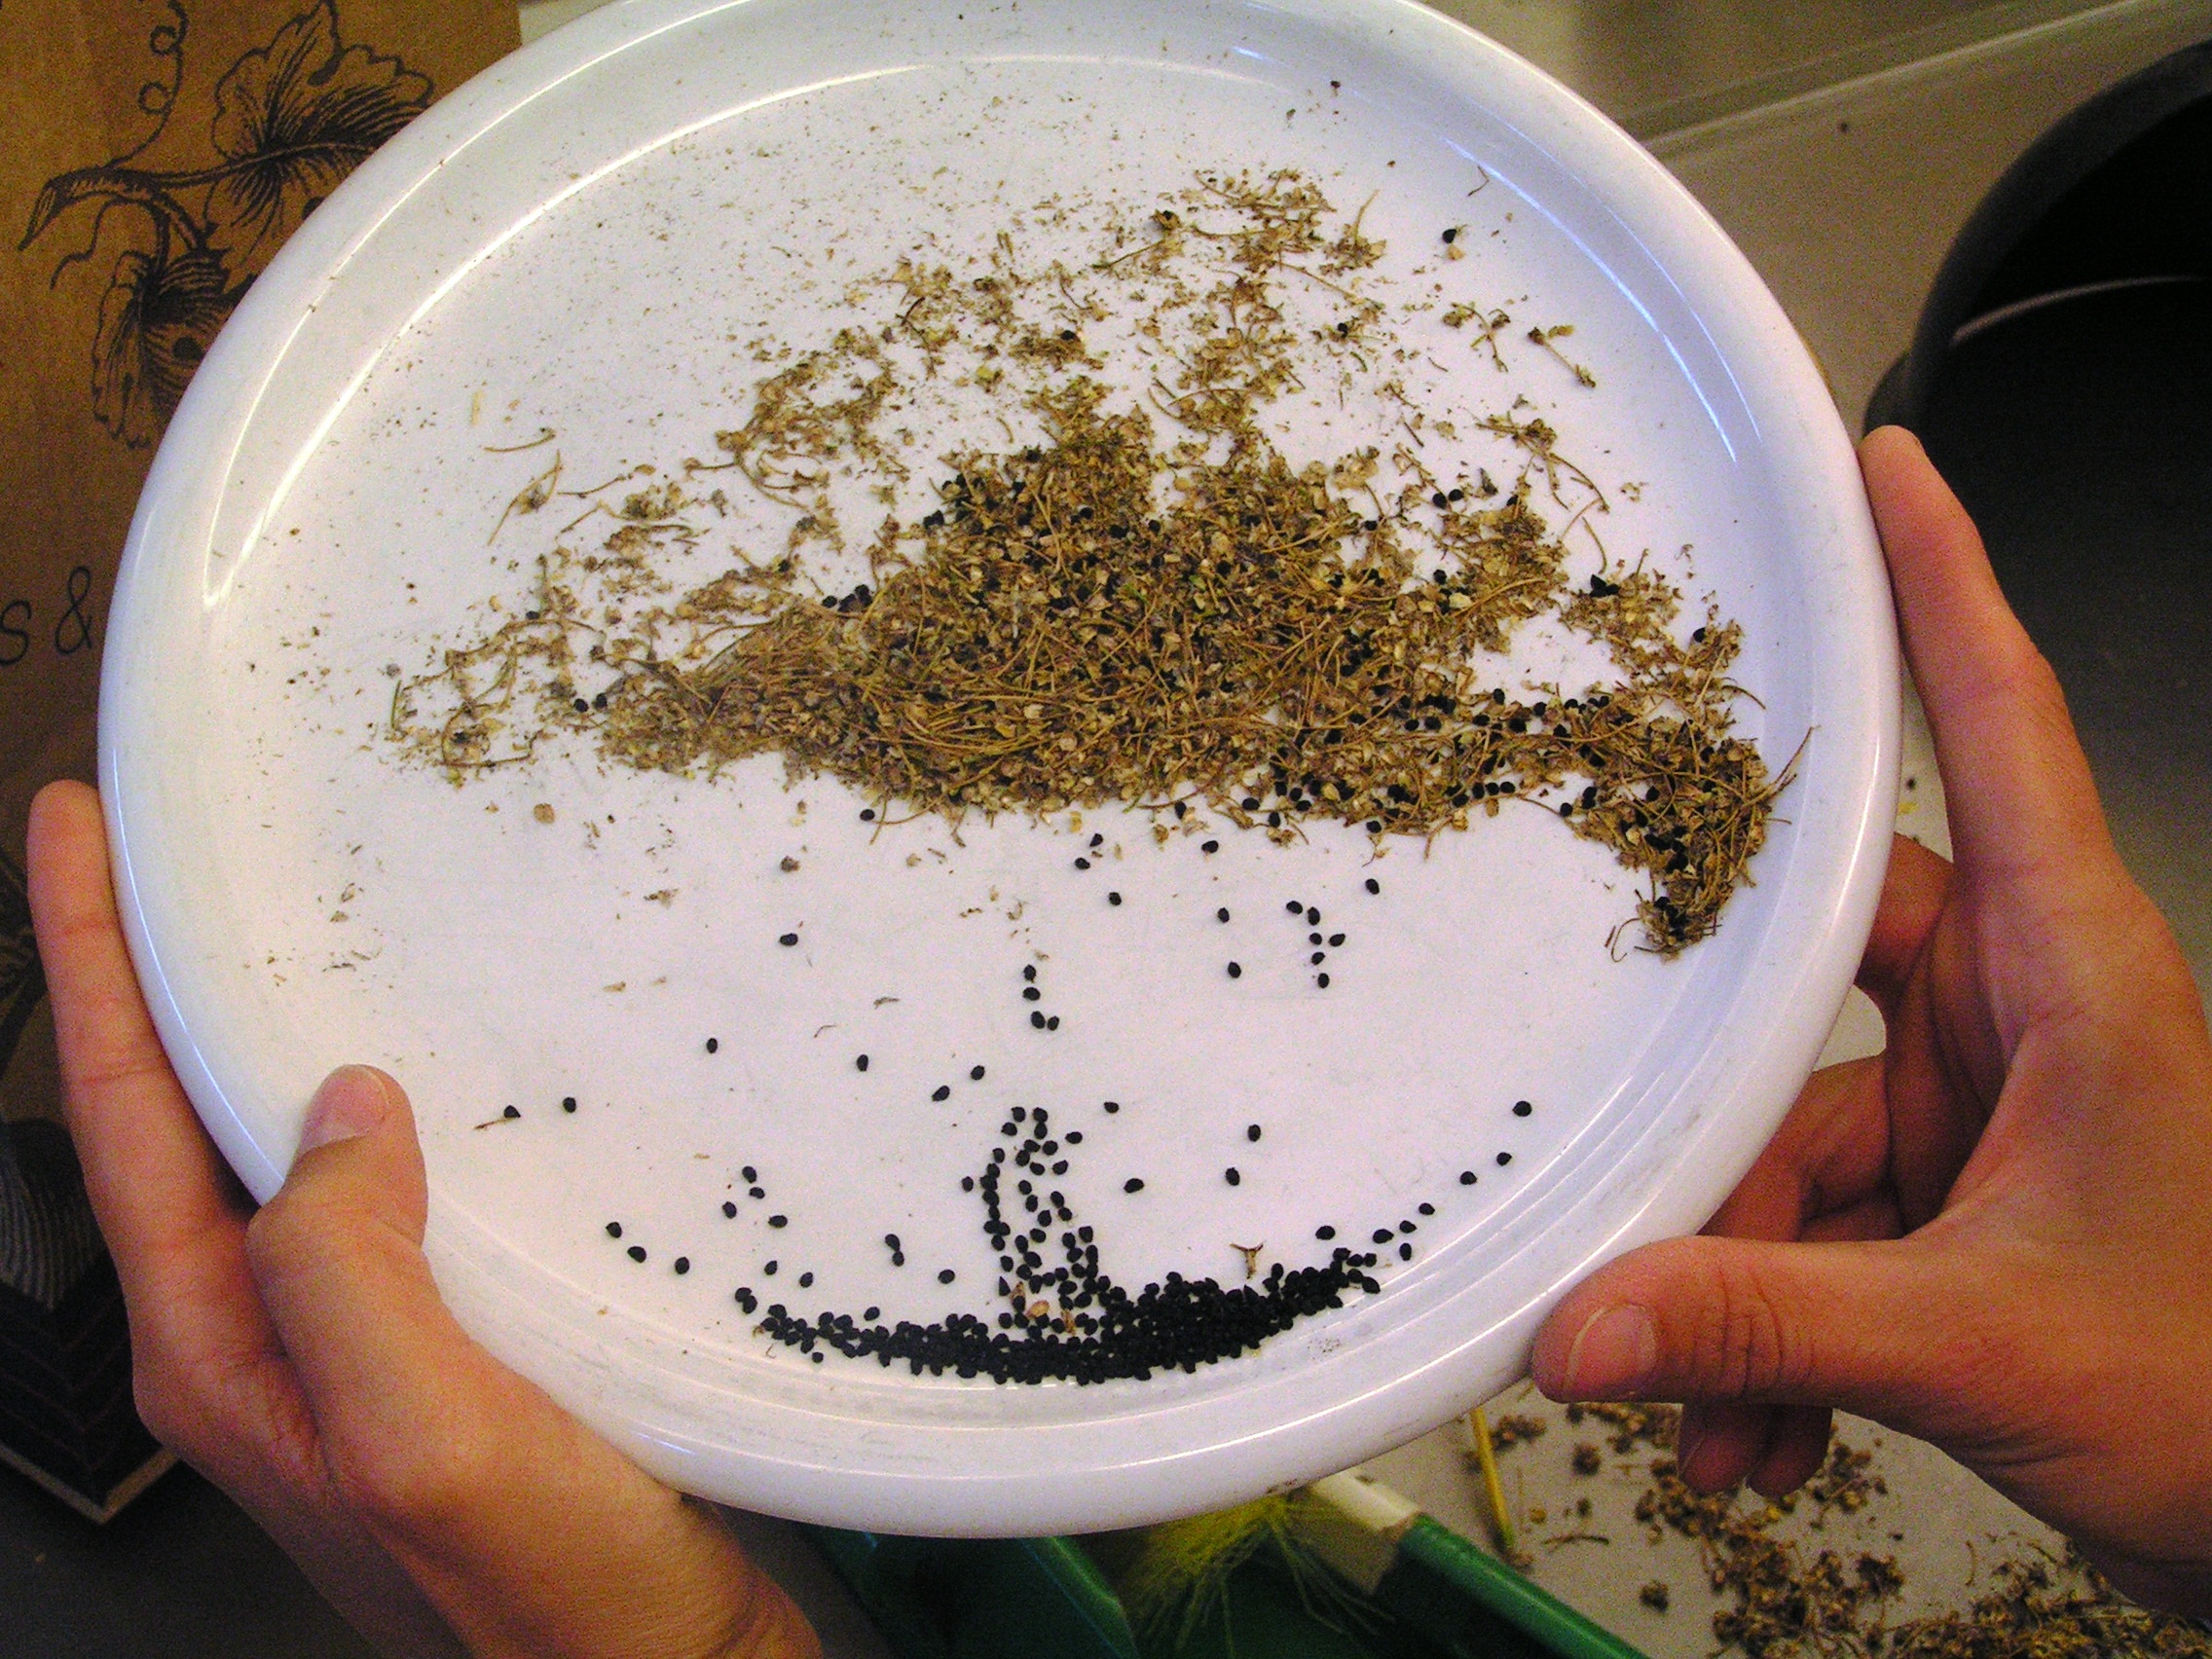 PHOTO: Hands hold a plate of seeds being sorted from chaff.